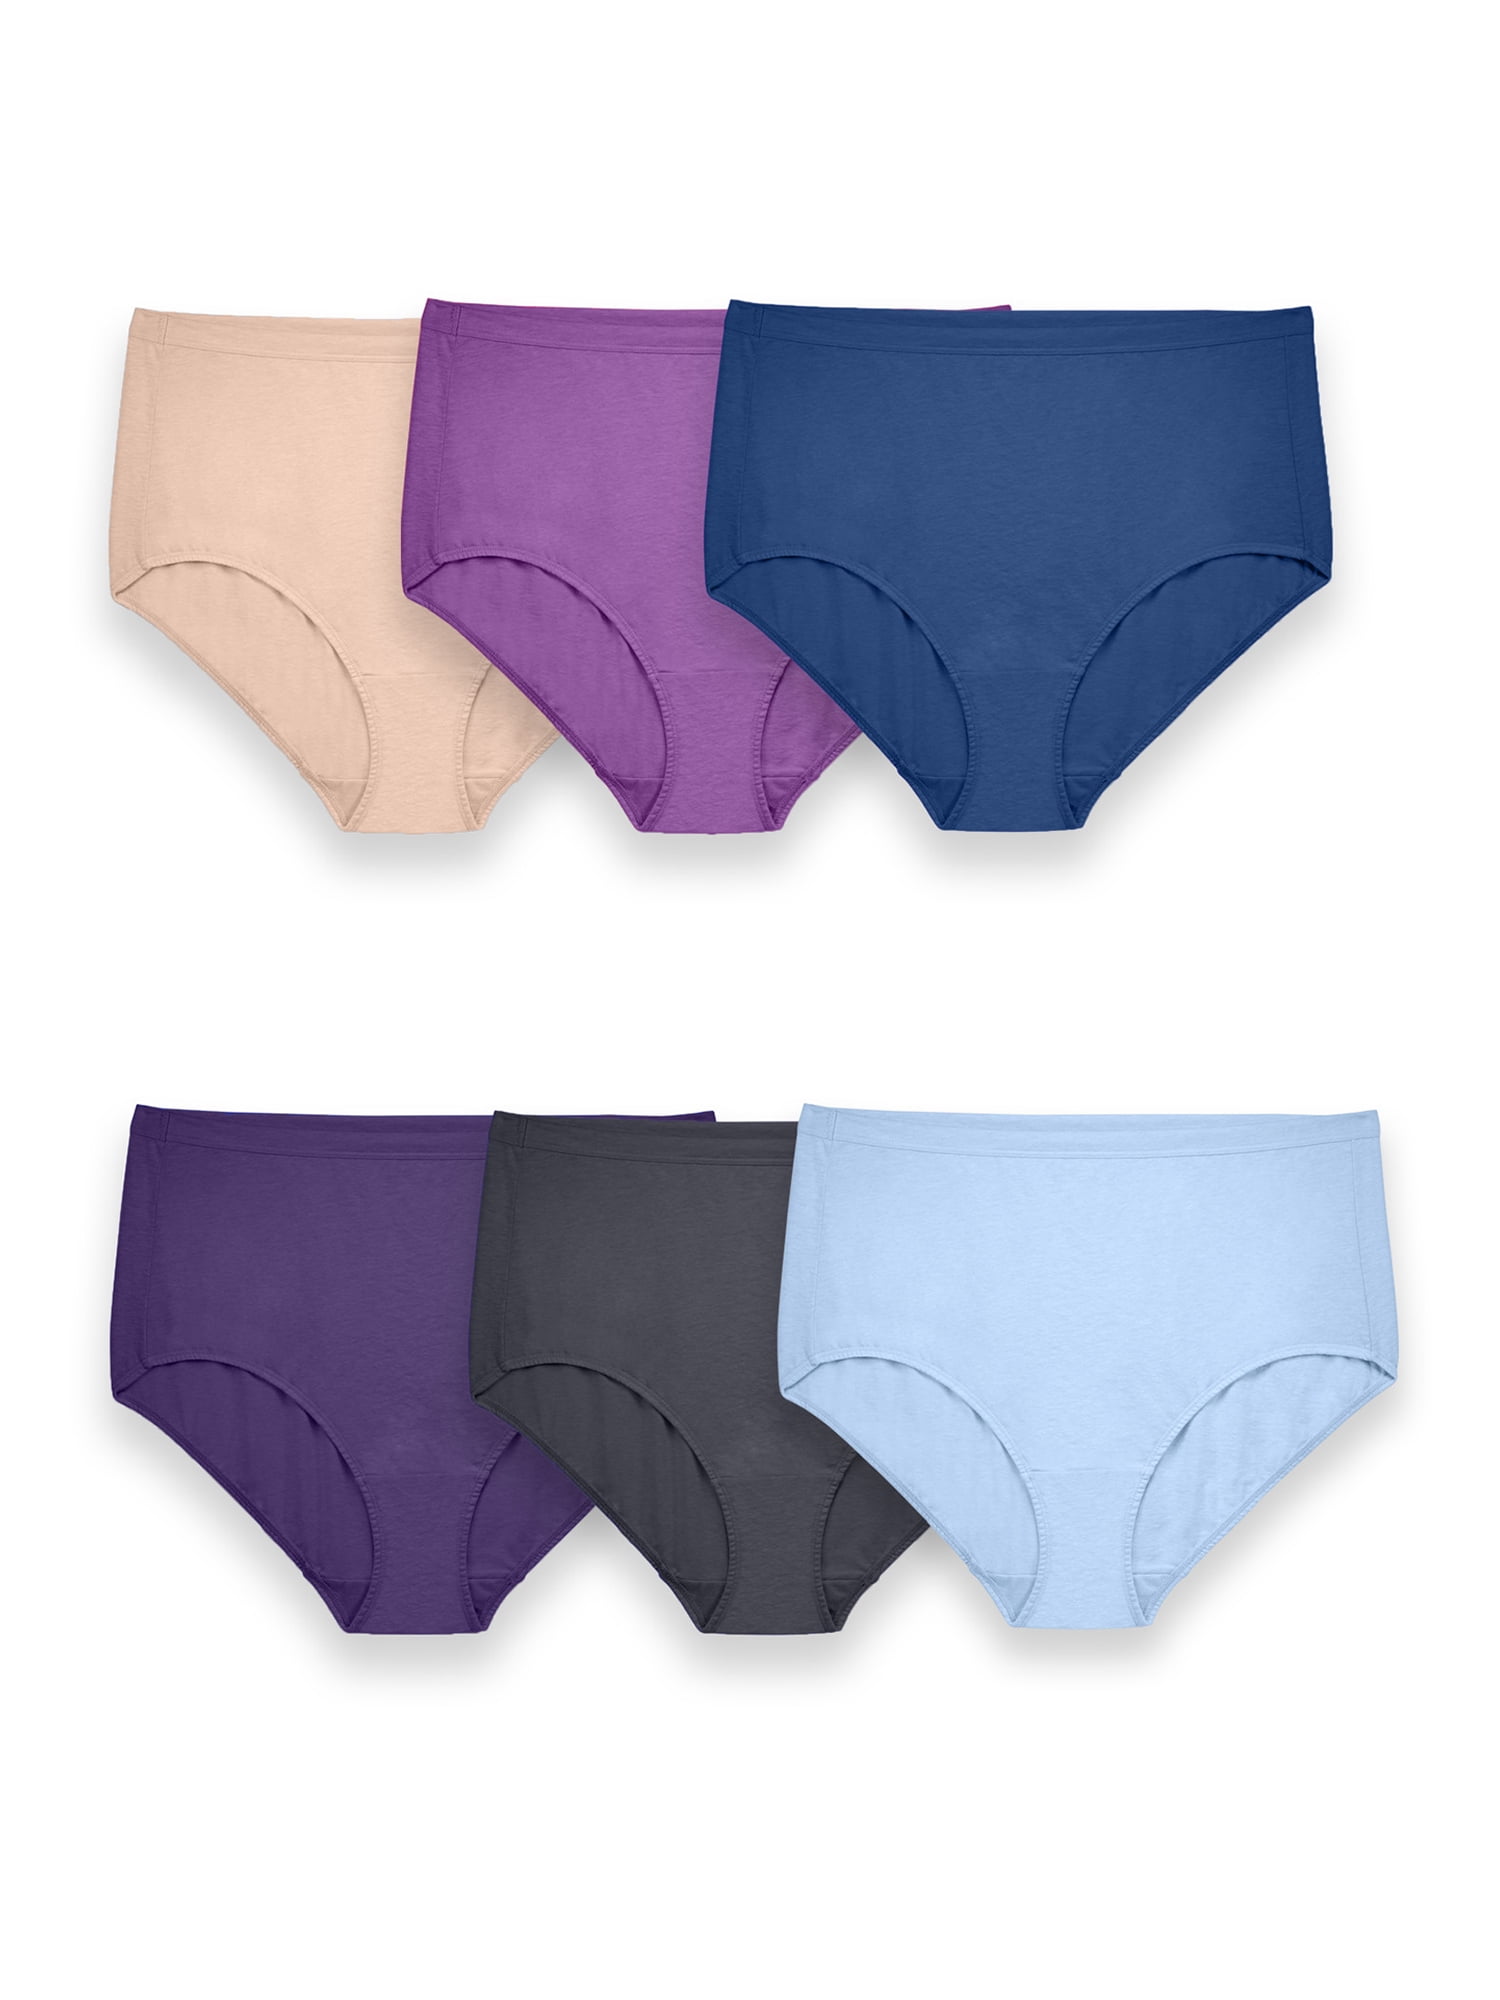 Fruit Of The Loom Fit For Me Womens 3 Pack Briefs Size 12 - beyond exchange